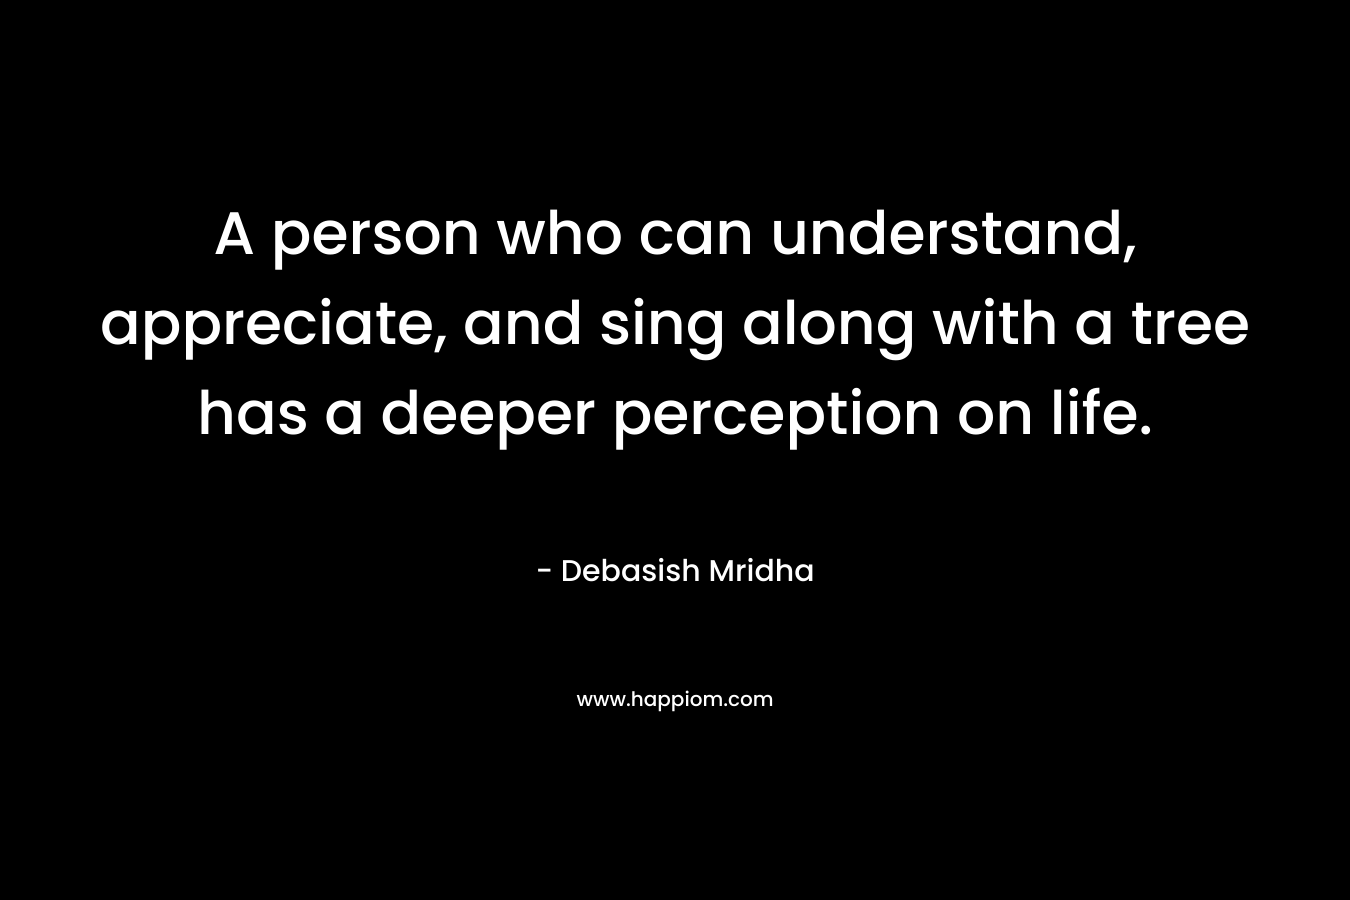 A person who can understand, appreciate, and sing along with a tree has a deeper perception on life.